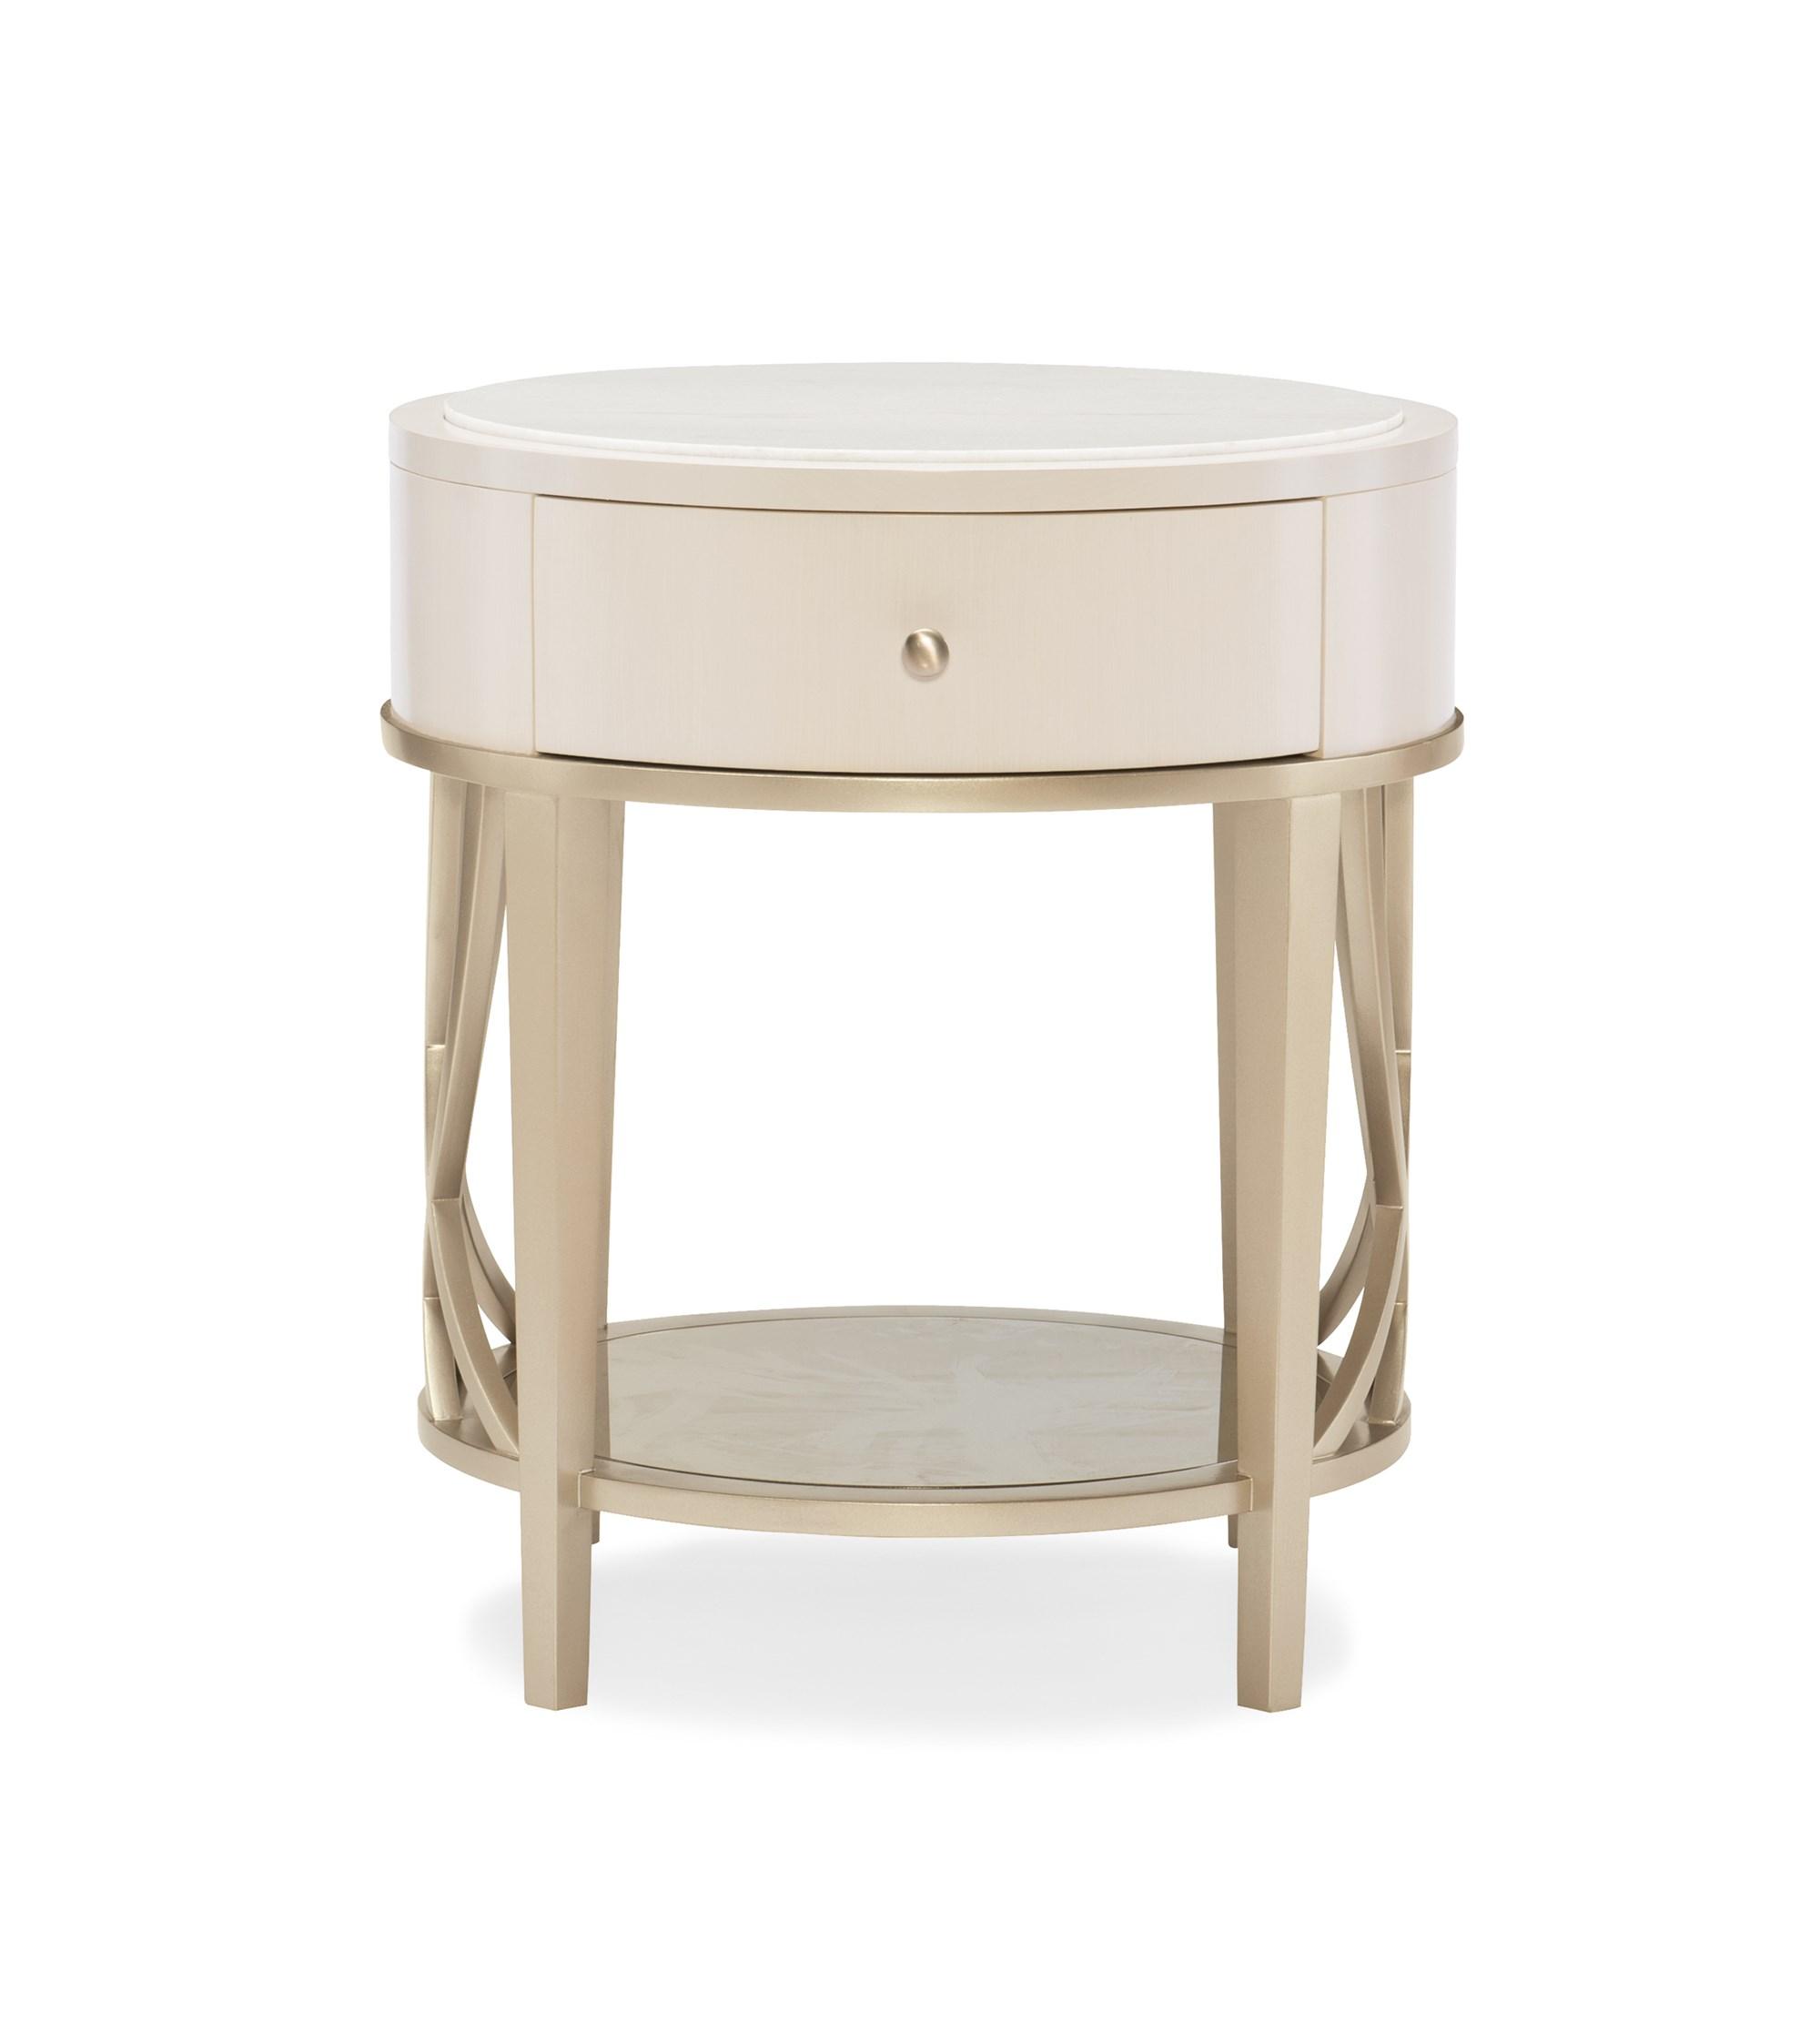 

    
Washed Alabaster Blush Taupe Inset Stone Top ADELA END TABLE by Caracole
